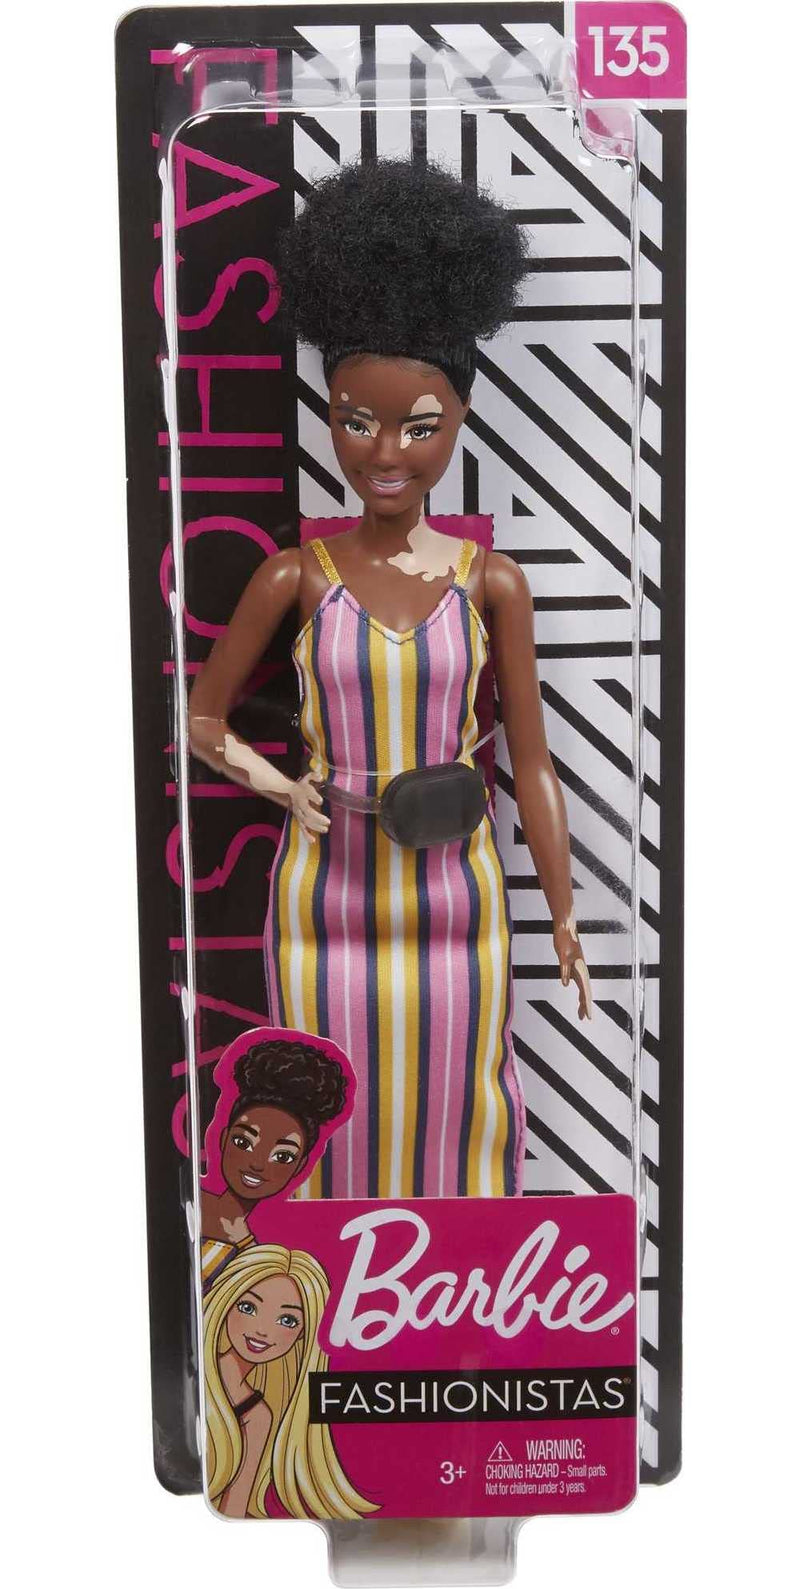 Barbie Fashionistas Doll #135 with Vitiligo and Curly Brunette Hair Wearing Striped Dress and Accessories